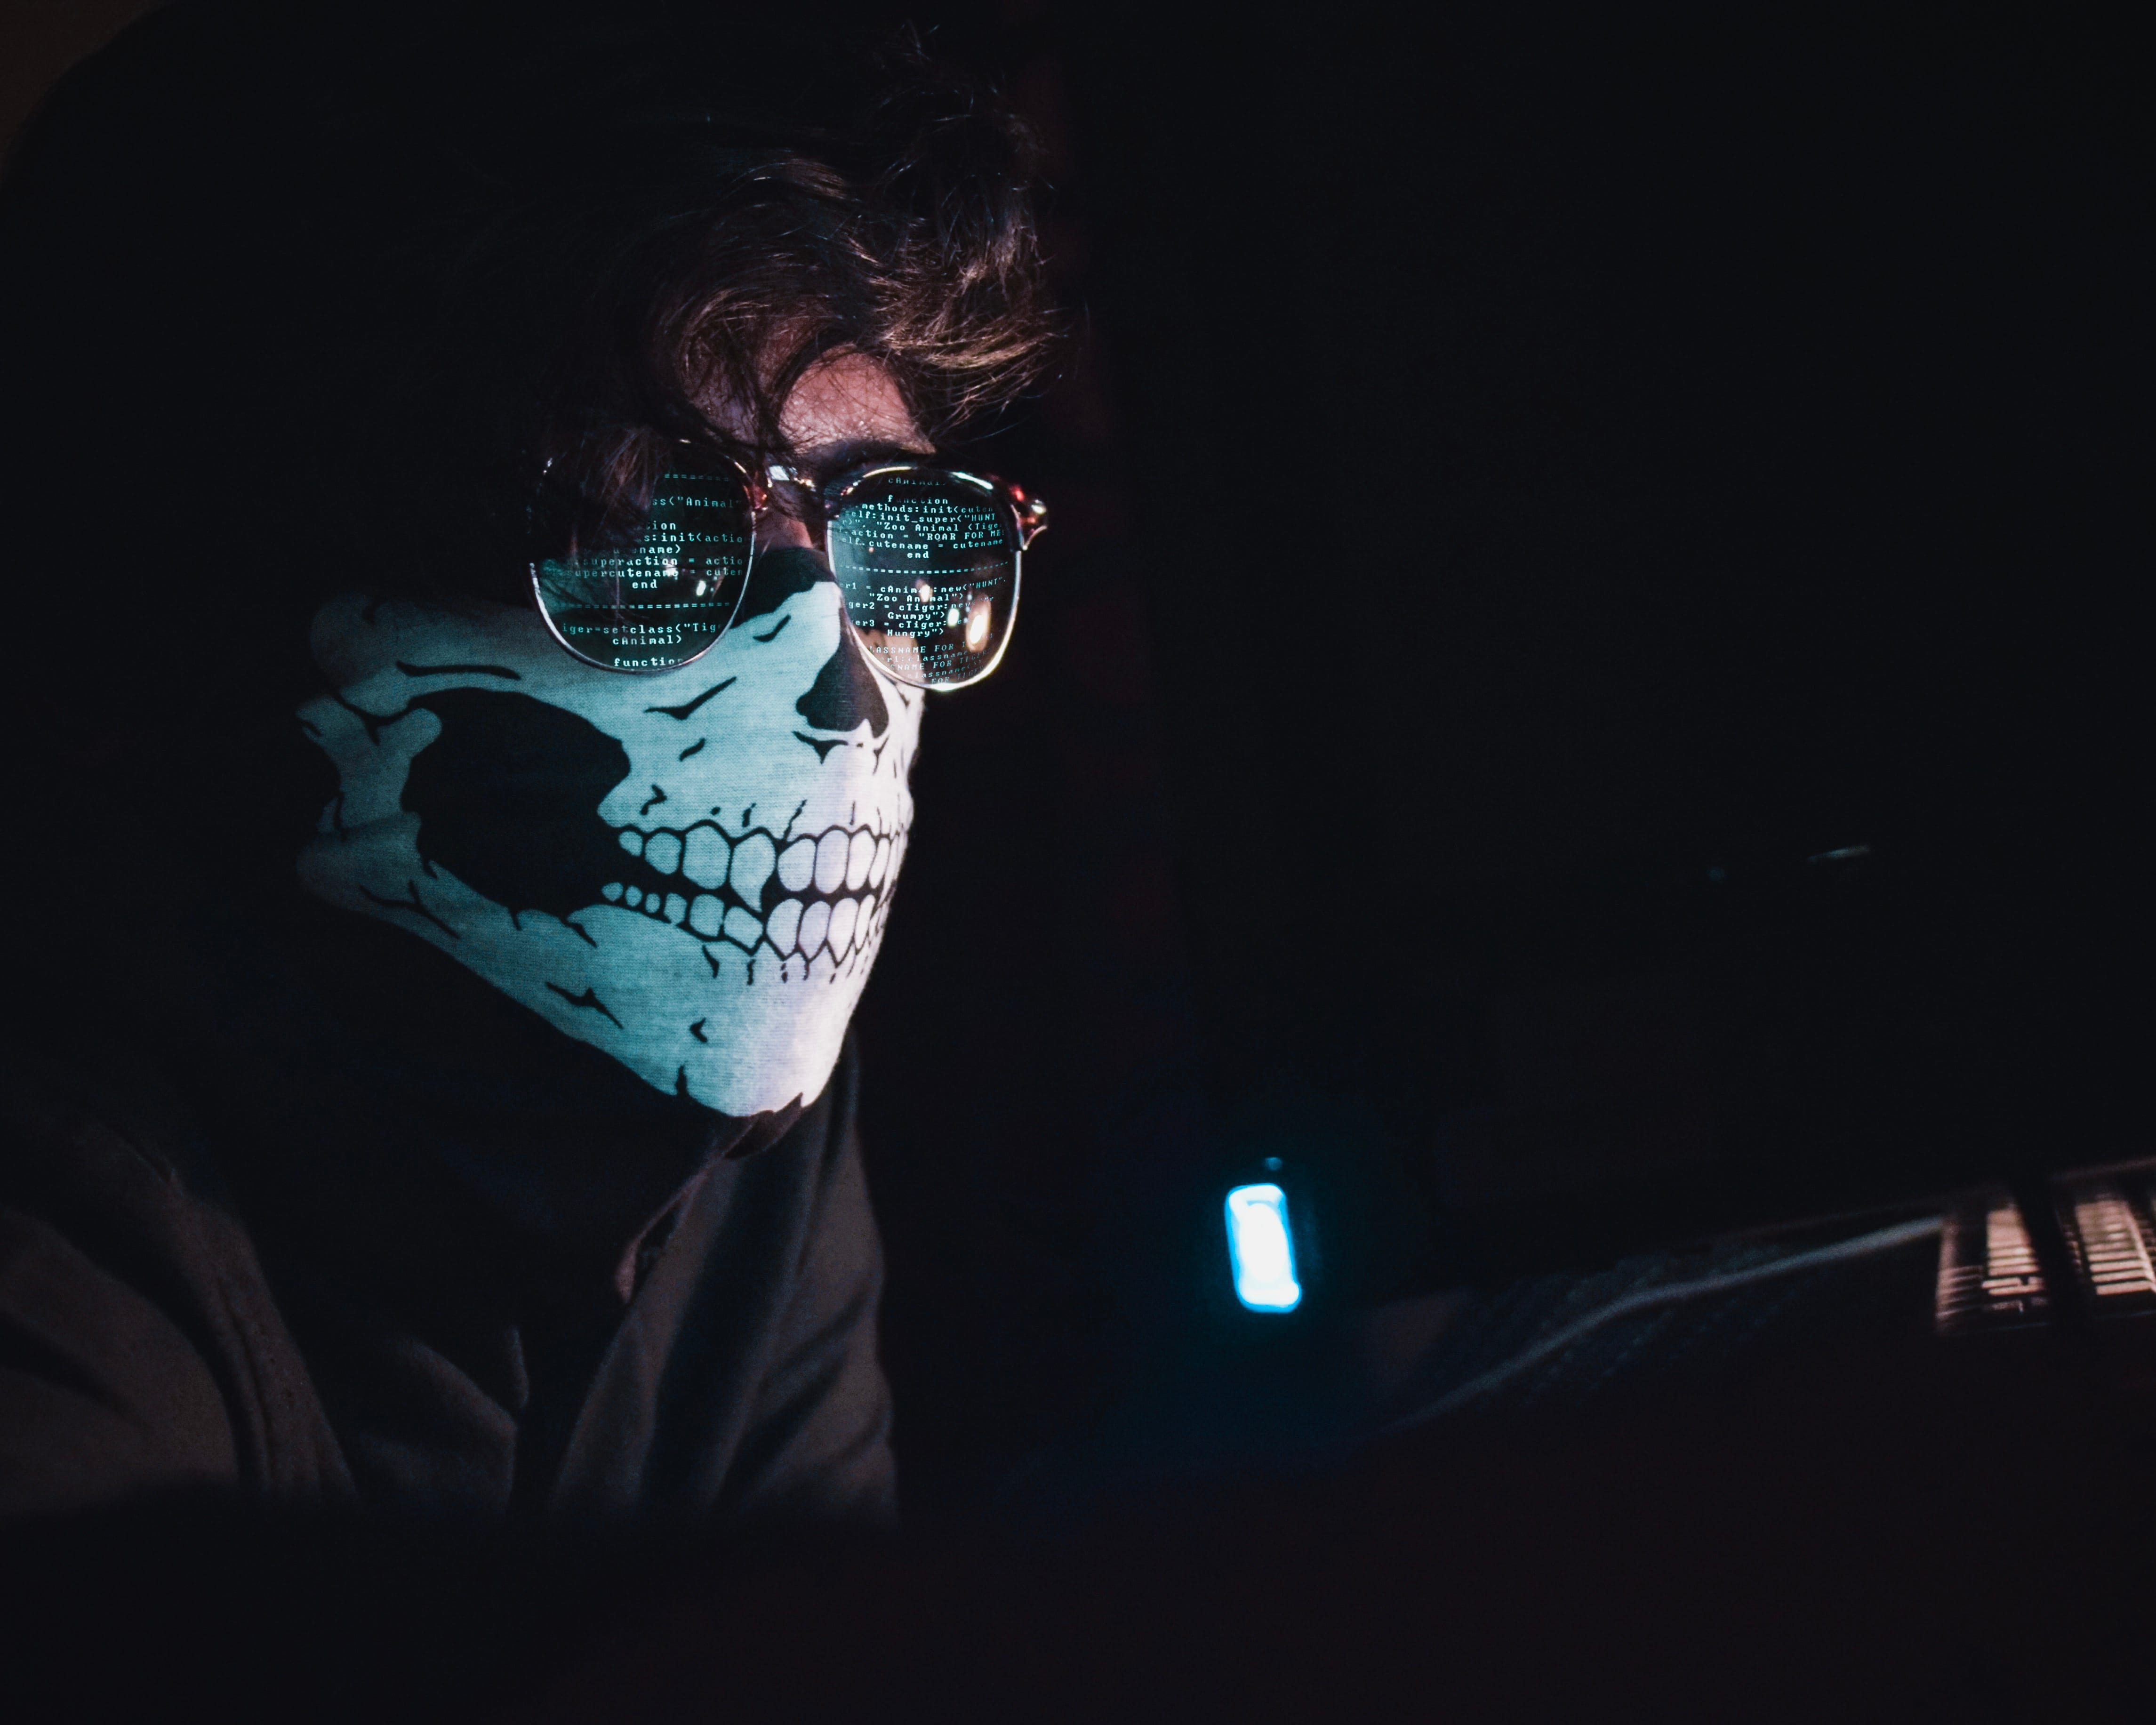 Man wearing a skull mask and reflective glasses in a dark room. Computer code is reflected in his glasses. Image by Nahel Abdul Nadi, via Unsplash.com.